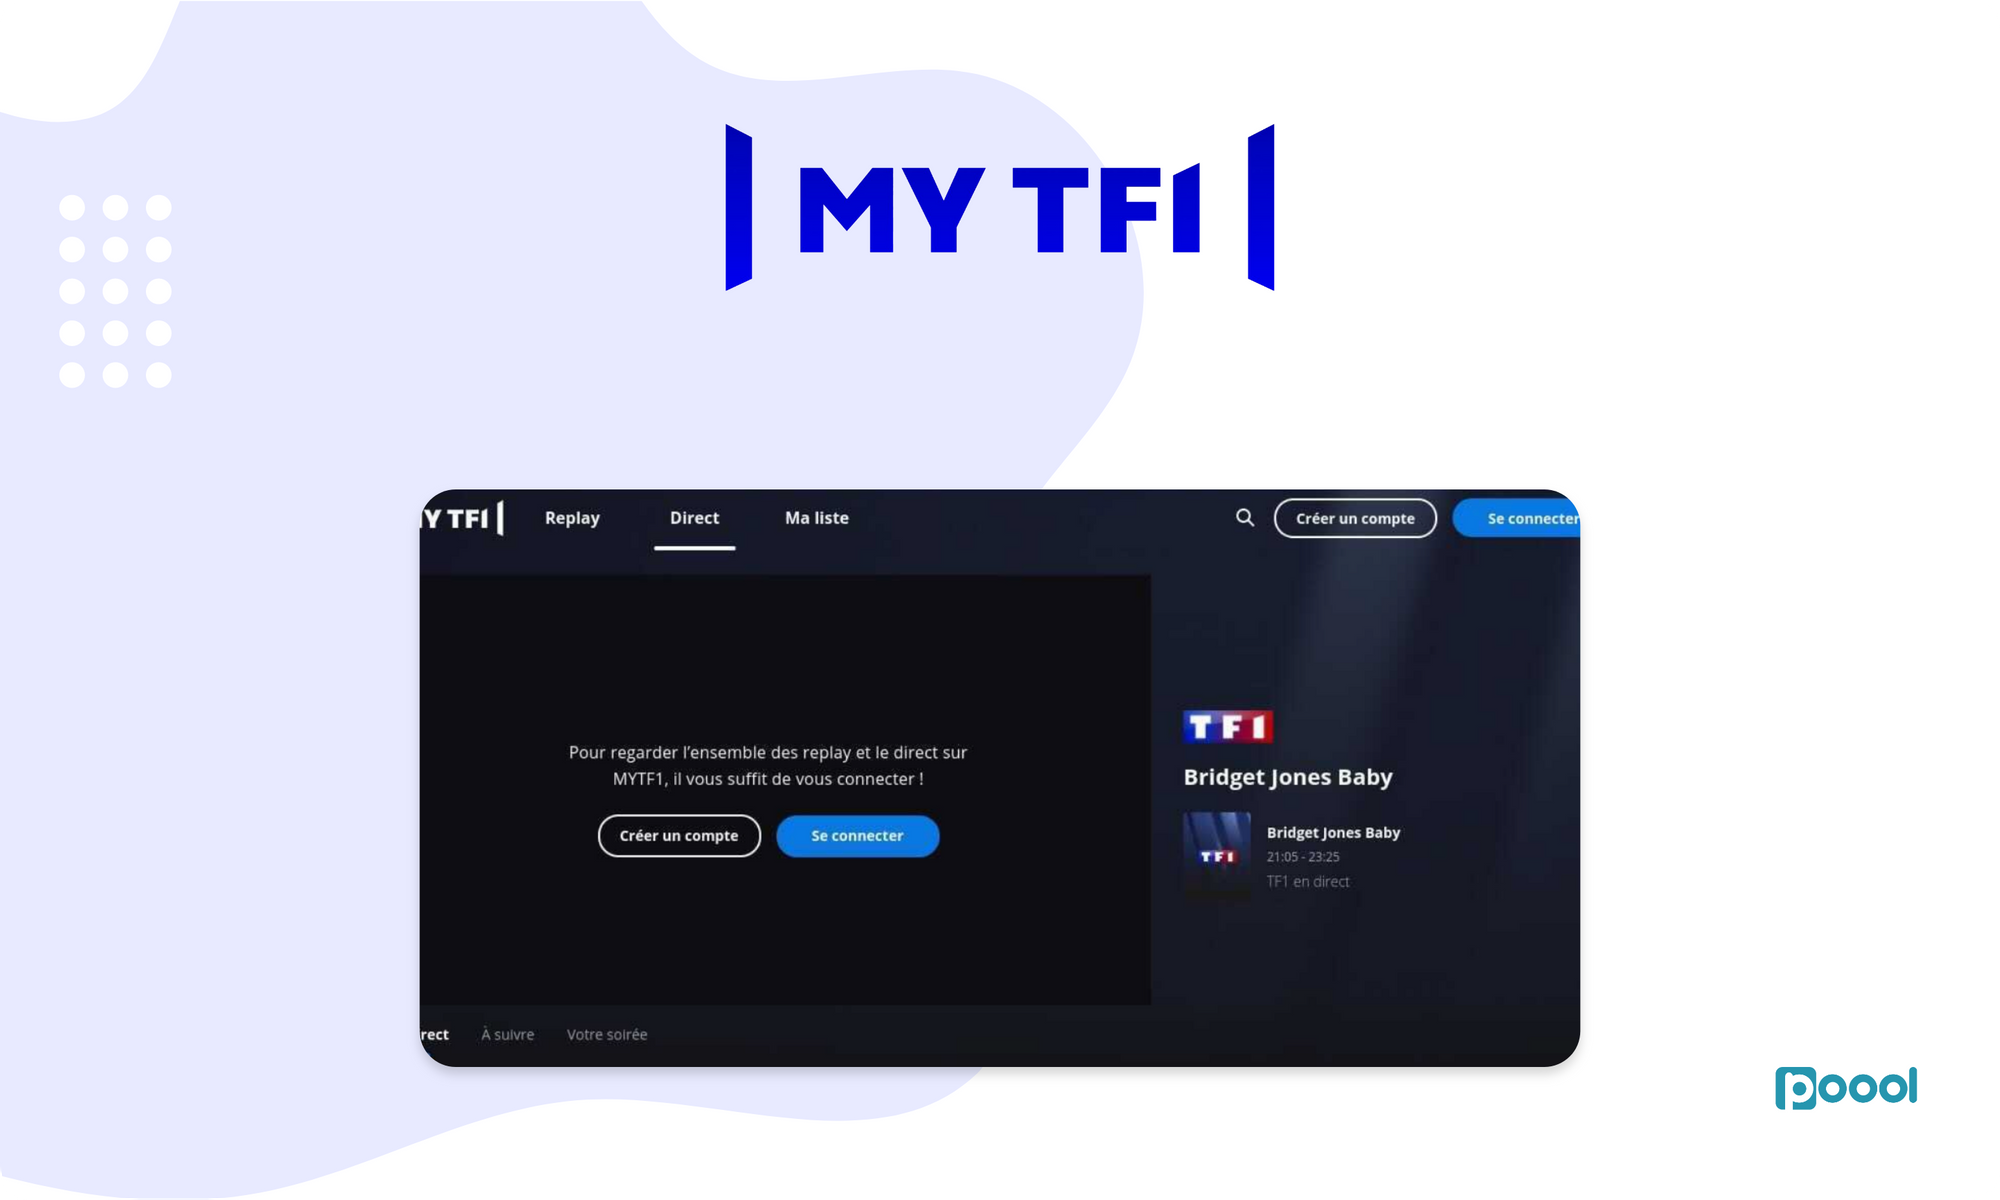 MY TF1 Registration Wall: From Content, to Registration to Content | Series.